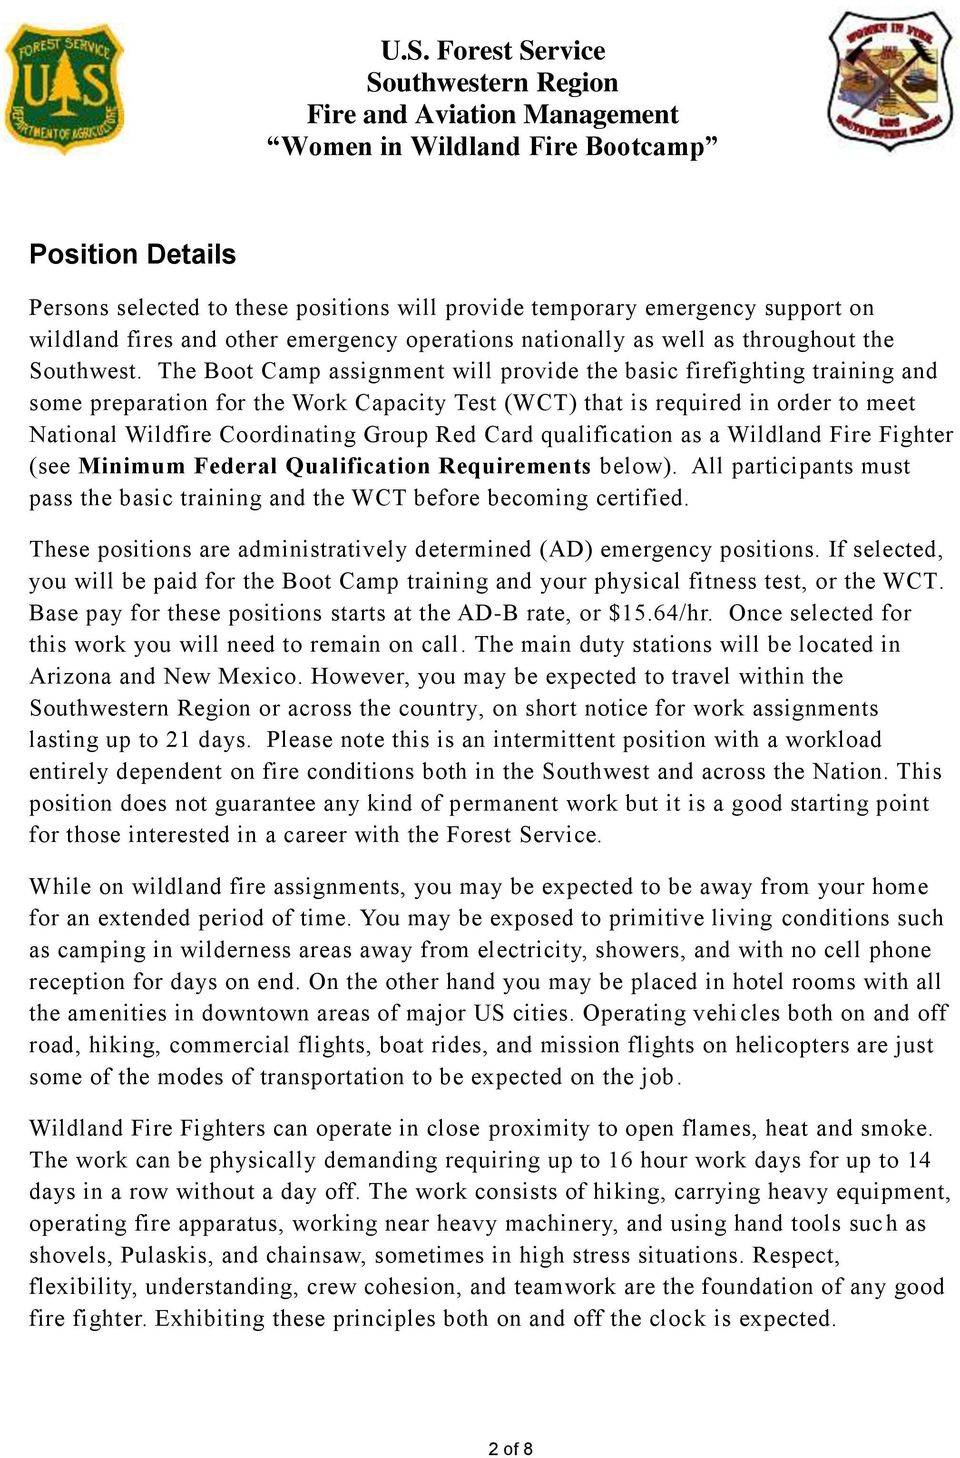 Card qualification as a Wildland Fire Fighter (see Minimum Federal Qualification Requirements below). All participants must pass the basic training and the WCT before becoming certified.